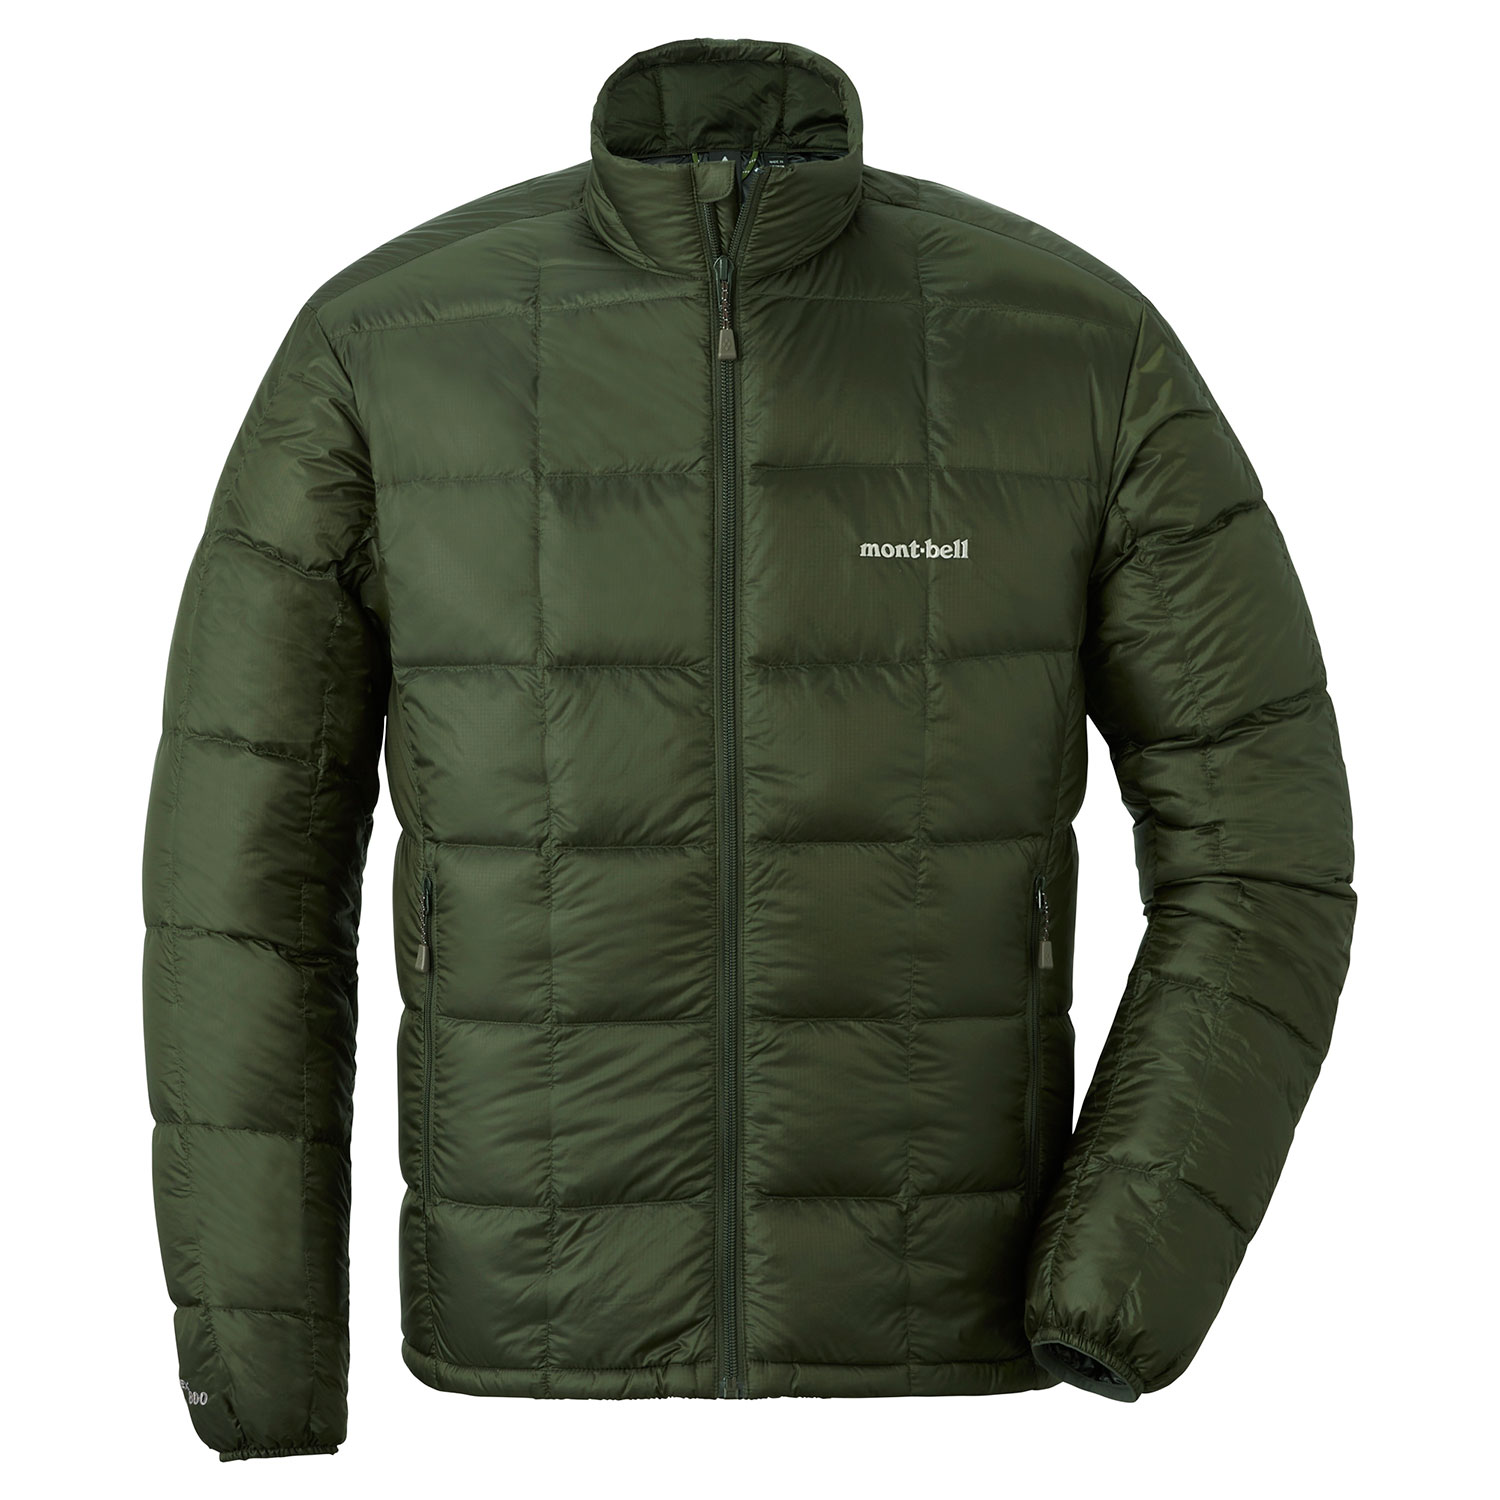 Unlock Wilderness' choice in the Montbell Vs North Face comparison, the Superior Down Jacket by Montbell